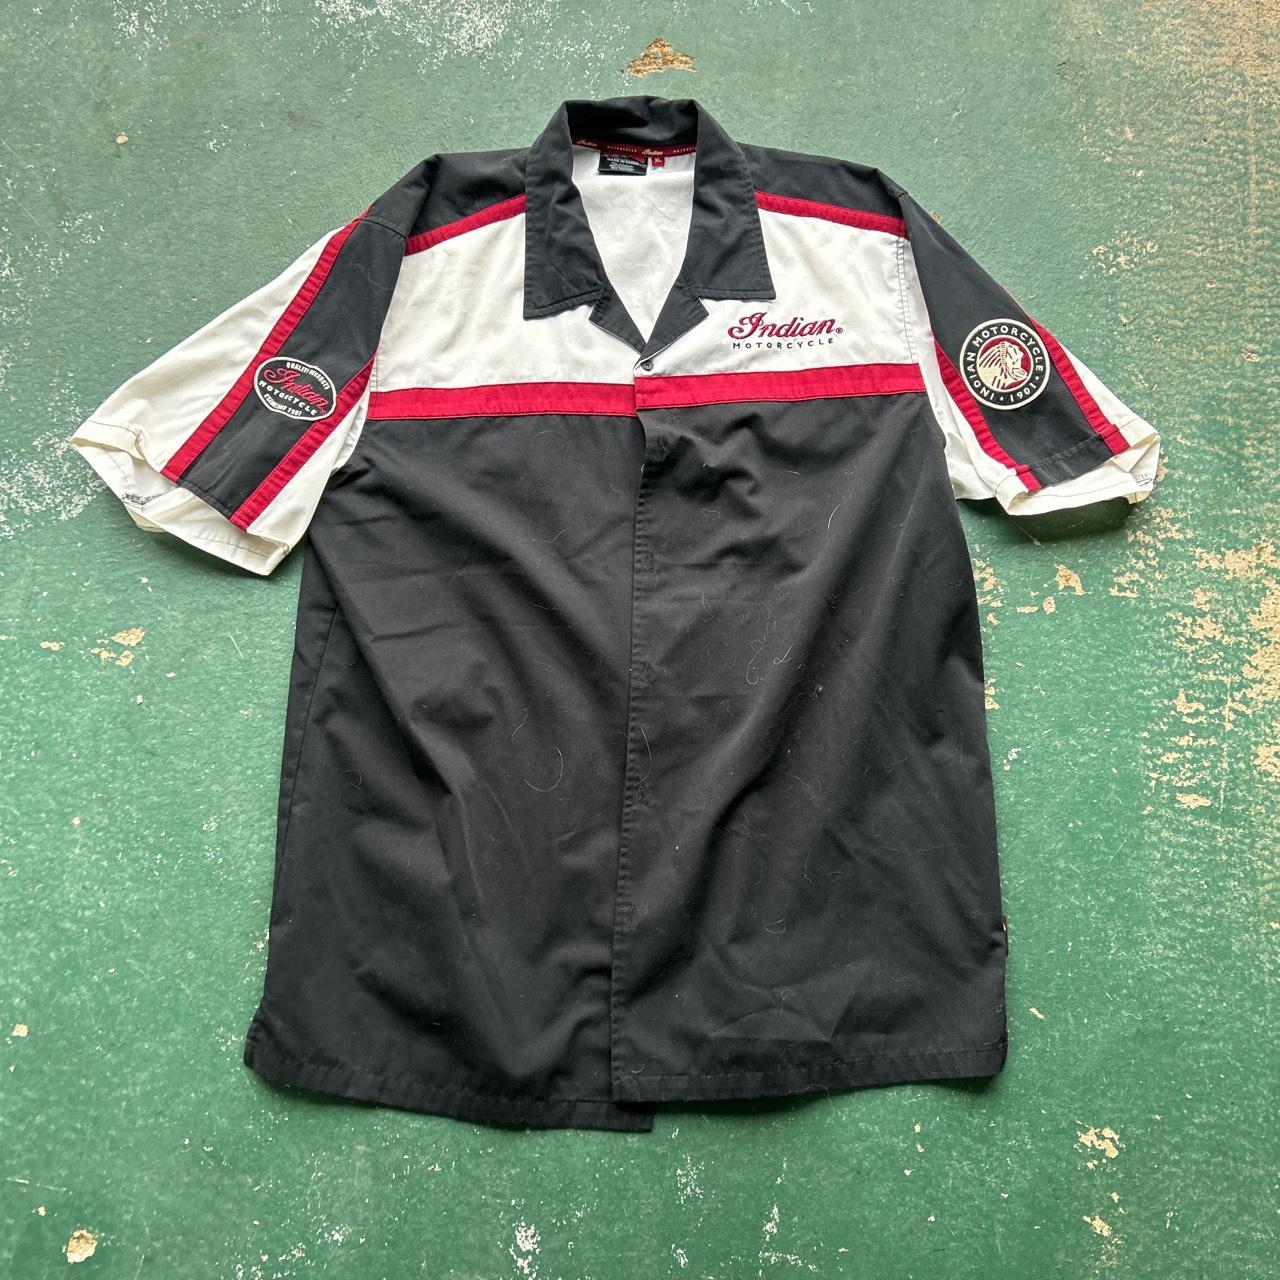 Vintage Indian MoterCycle Collared Racing Shirt Size... - Depop